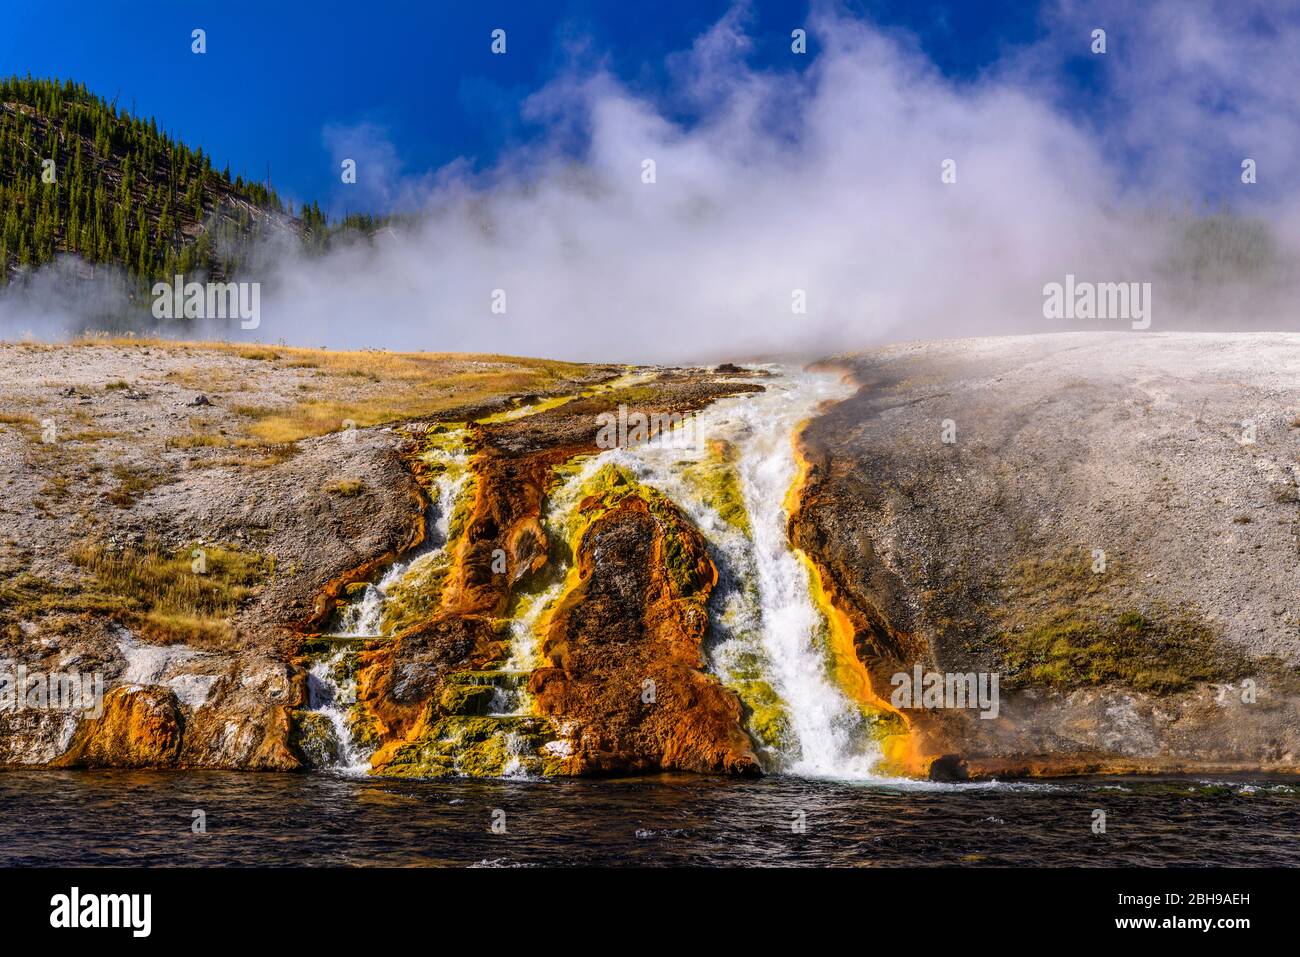 USA, Wyoming, Yellowstone National Park, Midway Geyser Basin, Excelsior Geyser, Firehole River Stockfoto